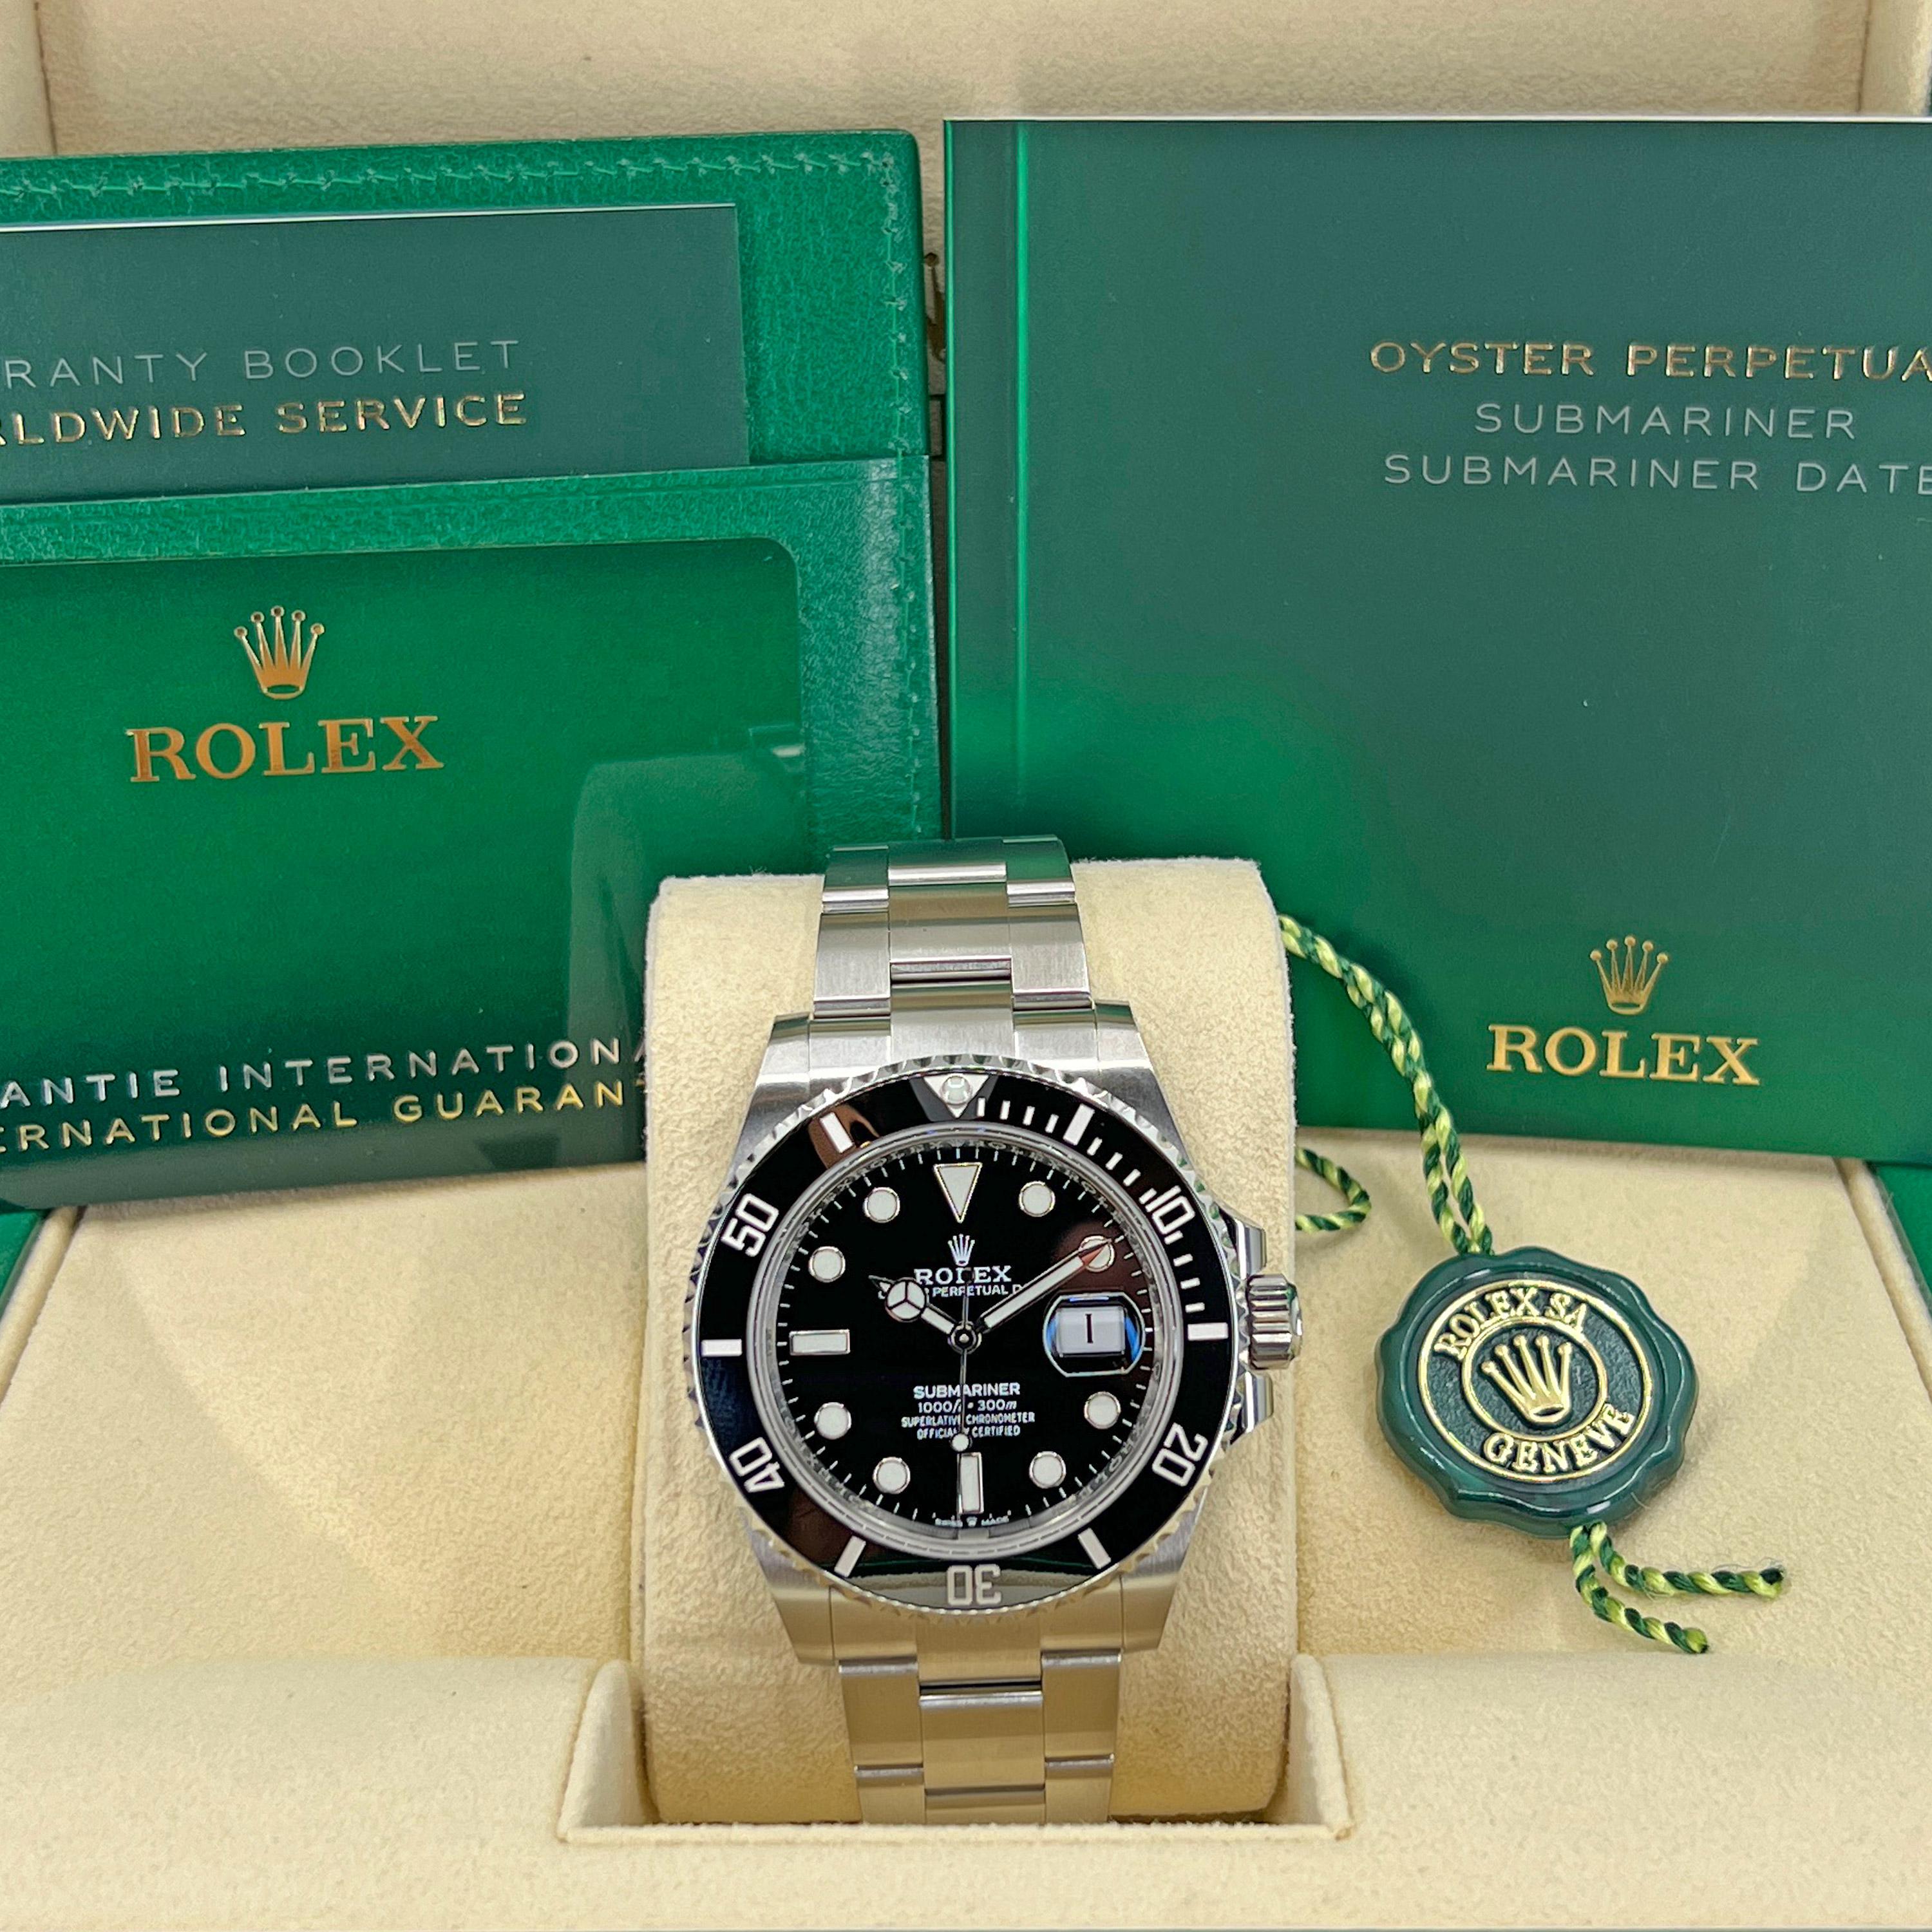 The Submariner's rotatable bezel is a key functionality of the watch. Its 60-minute graduations allow a diver to accurately and safely monitor diving time and decompression stops. Manufactured by Rolex from a hard, corrosion-resistant ceramic, the